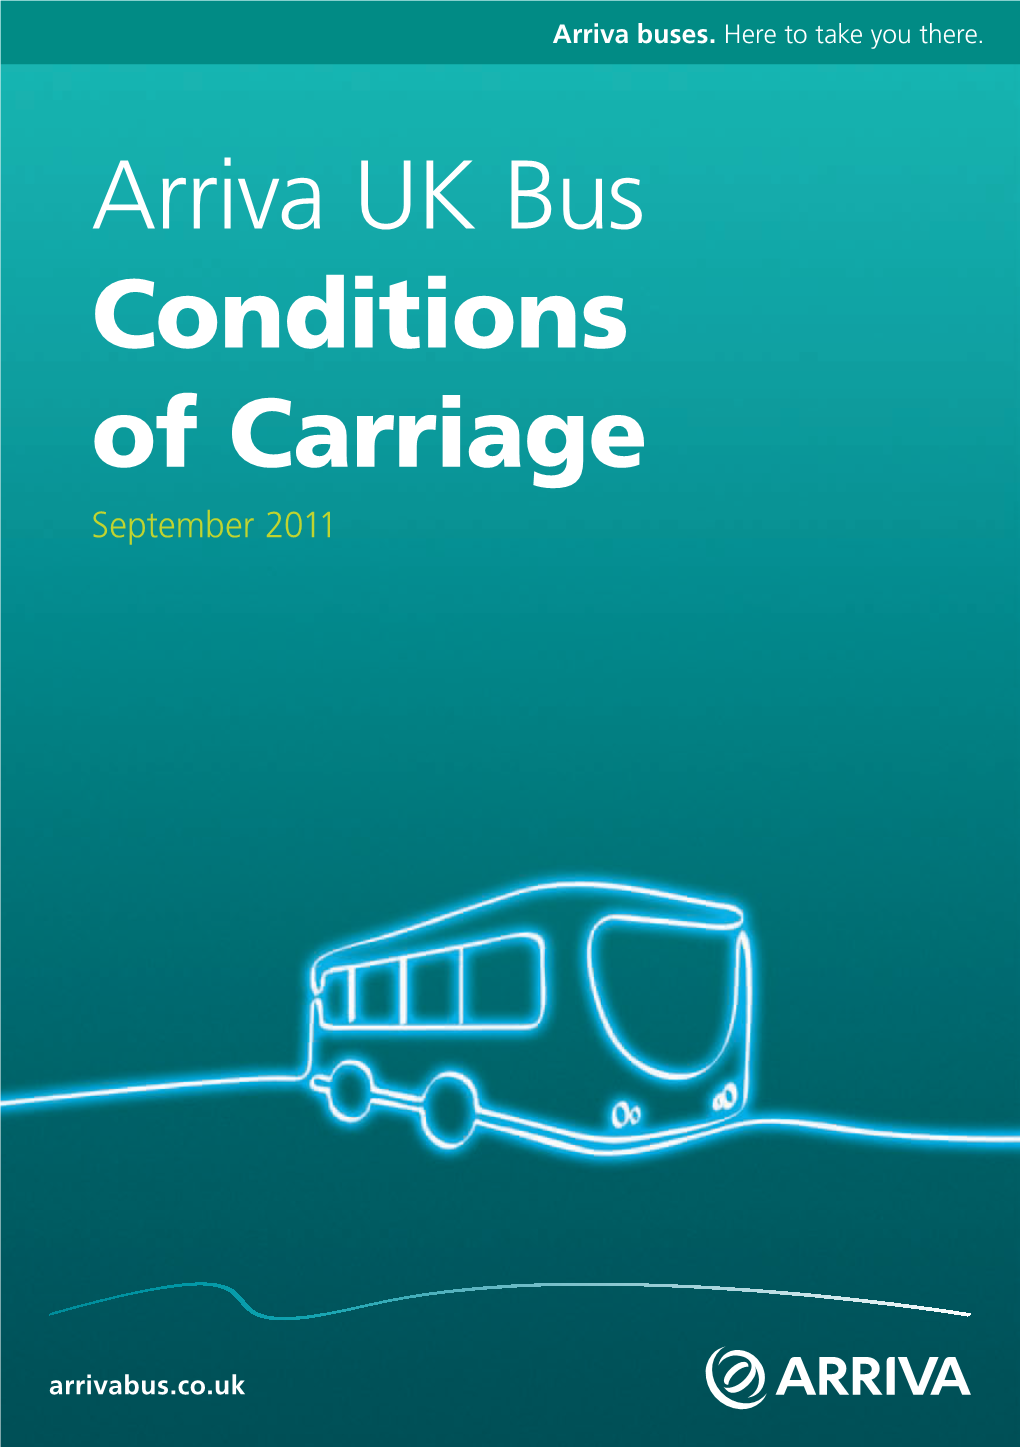 Arriva UK Bus Conditions of Carriage September 2011